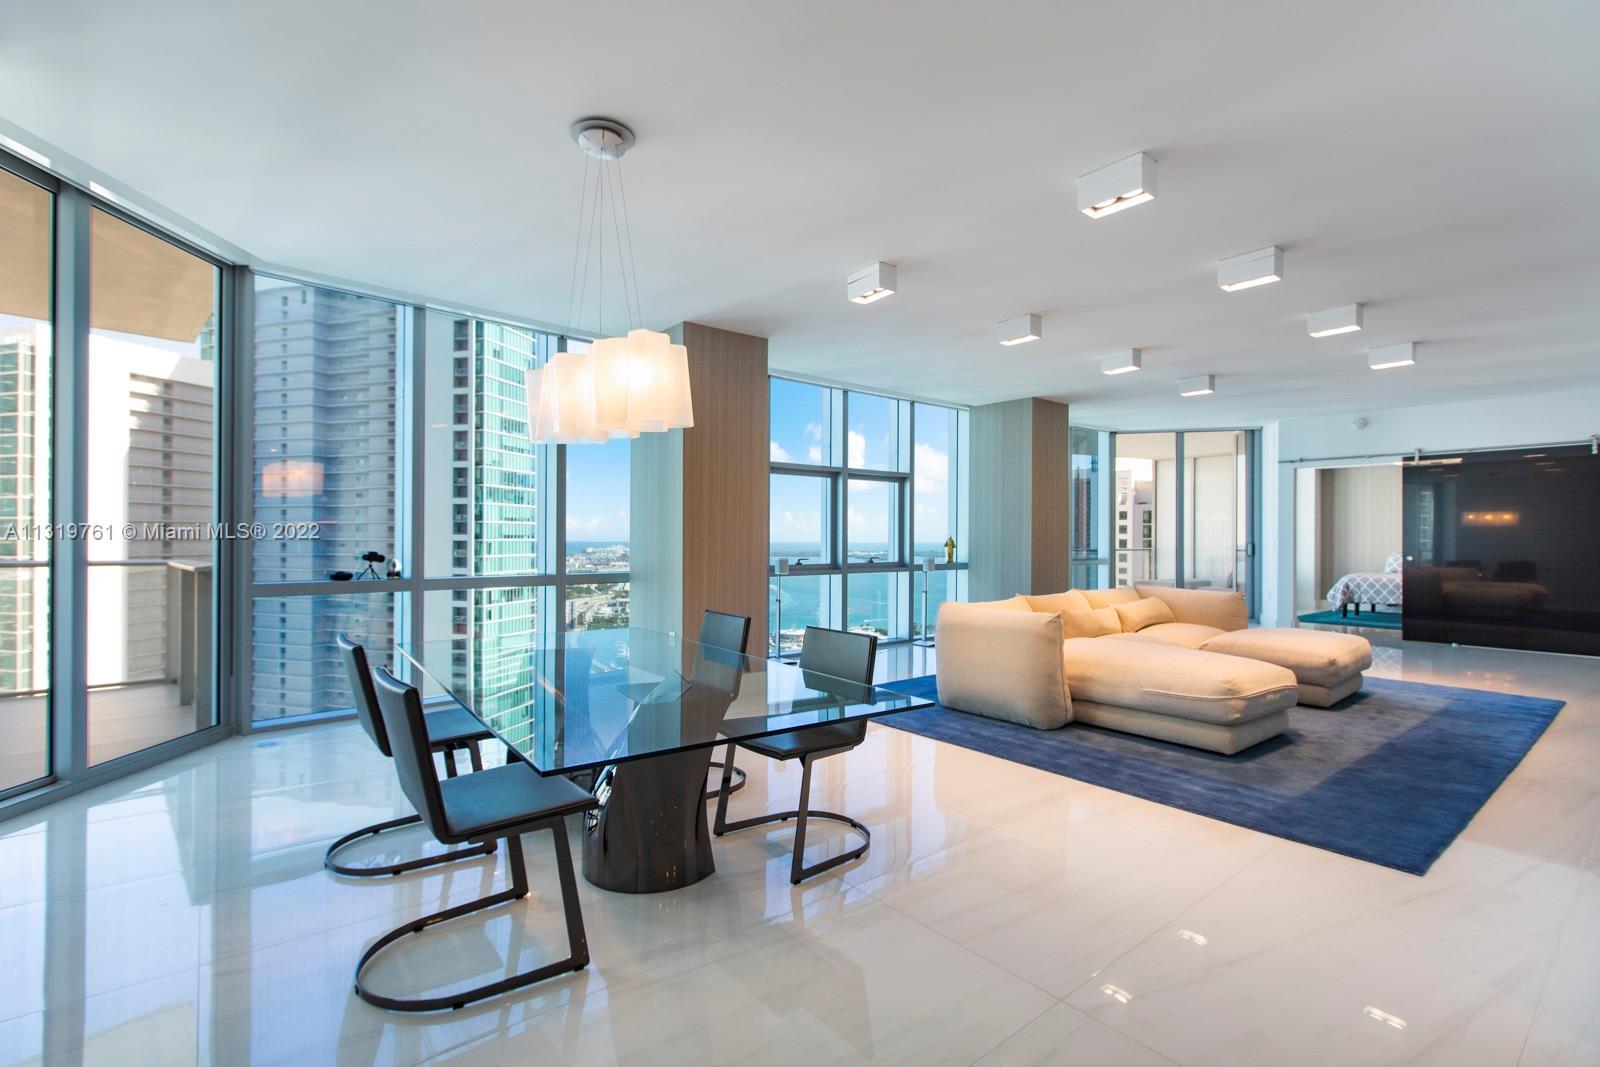 Exquisite custom residence with over 3,000 SF at Paramount Miami World Center. This combined residen